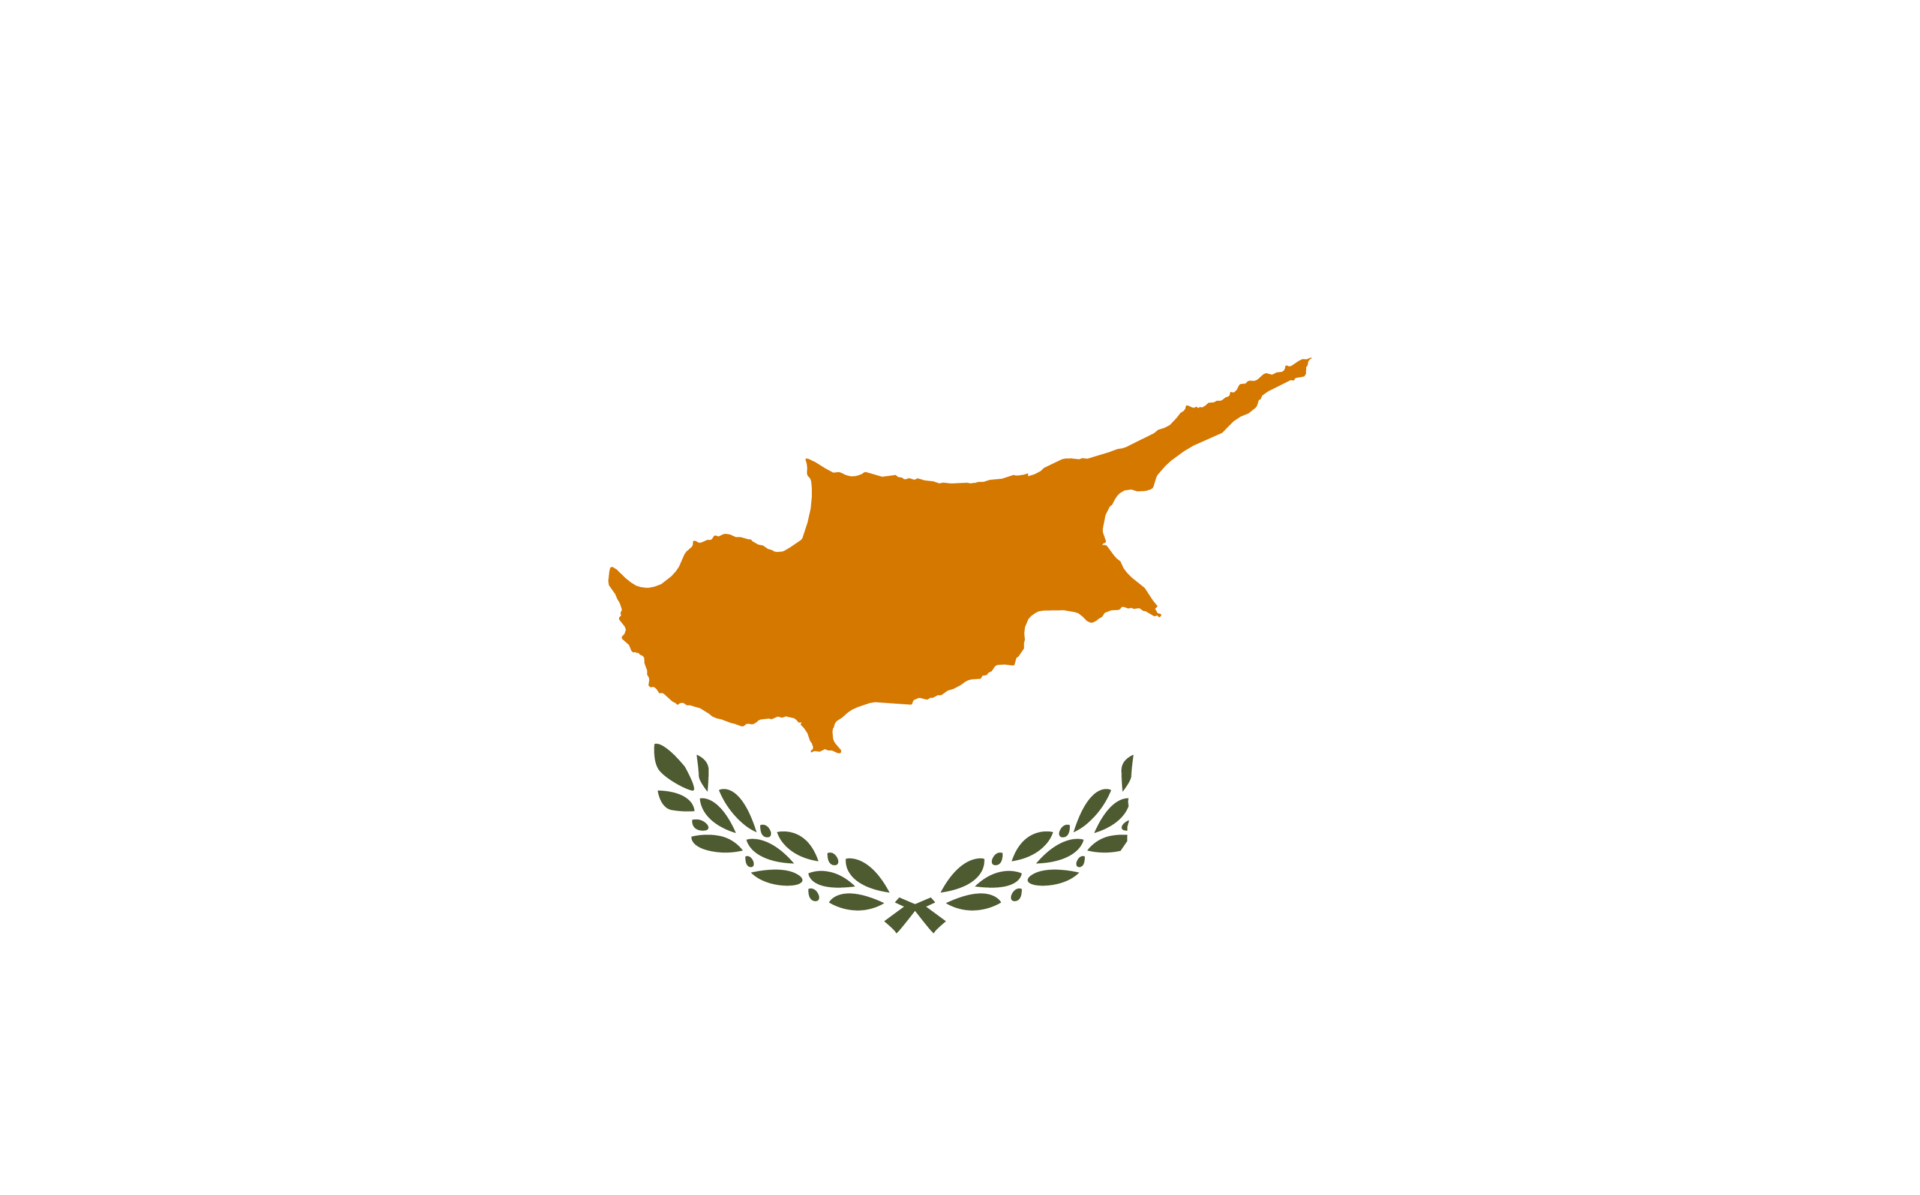 Health in Cyprus